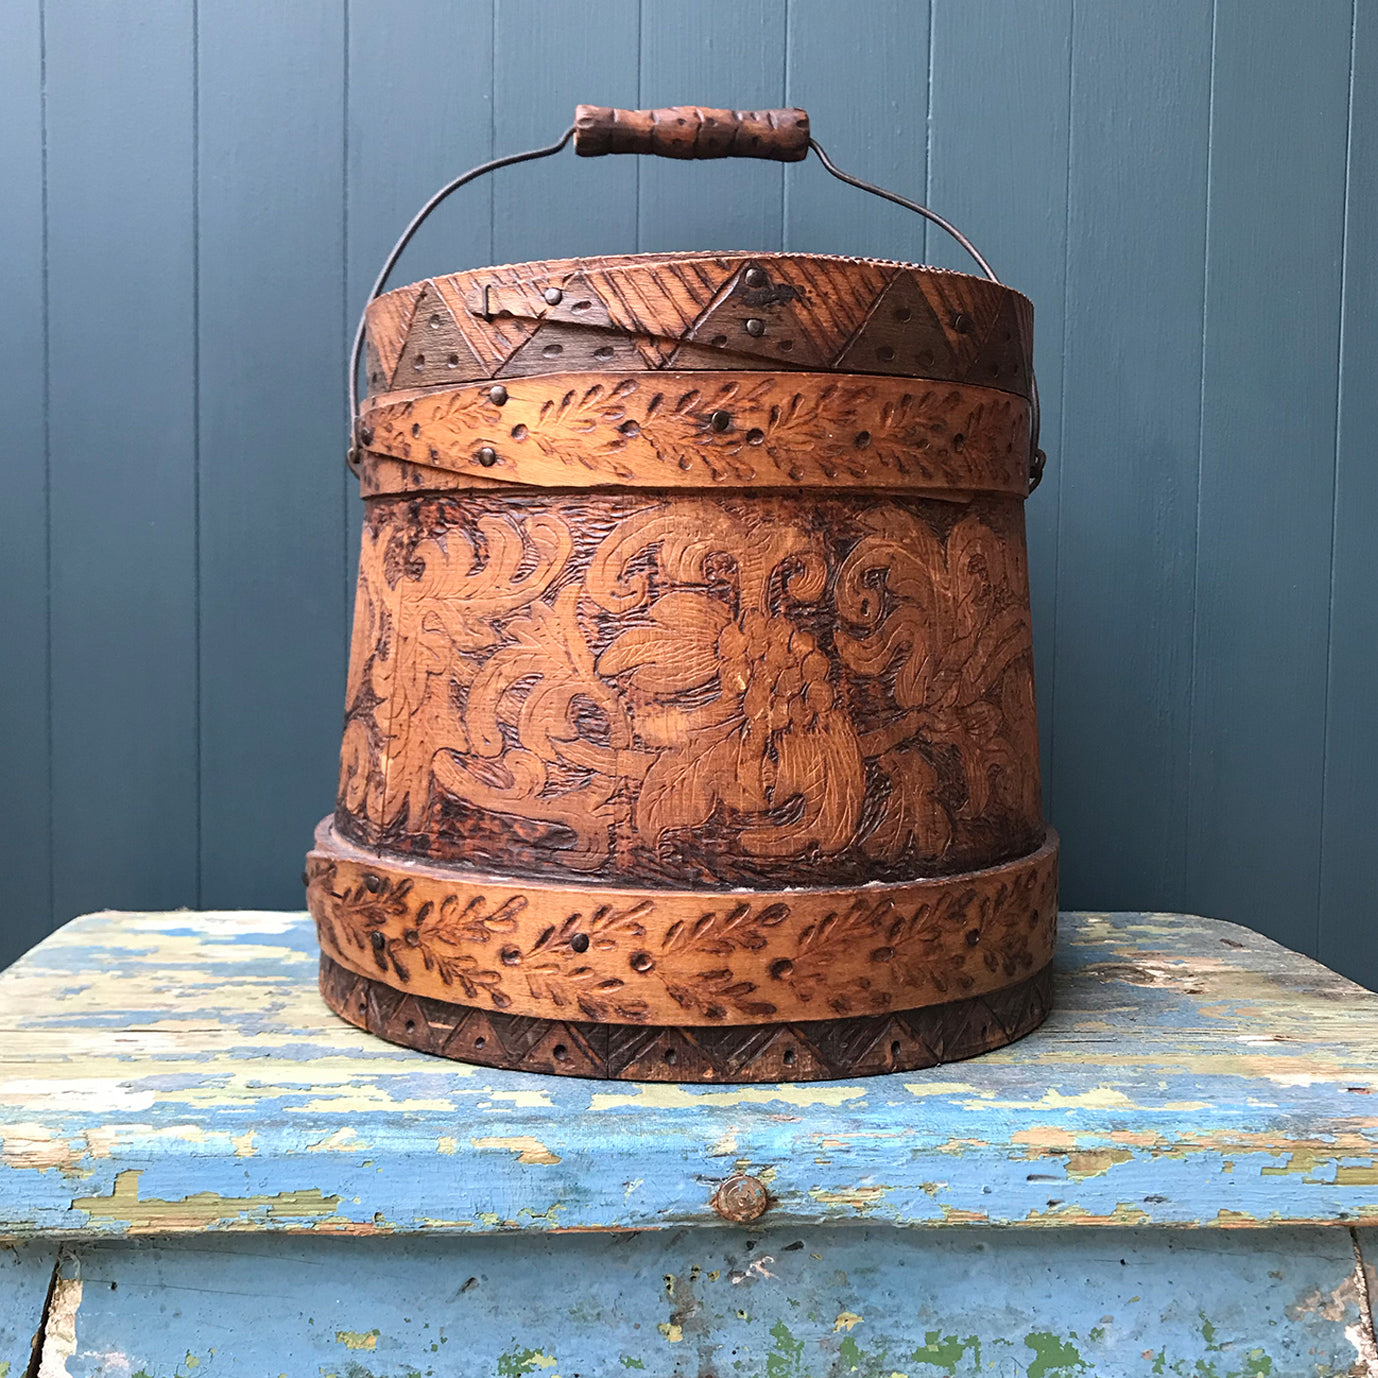 A beautiful early Nordic, carved and hot poker-worked wooden vessel with lid and handle. hand carved with peony and lily flowers and a stylised oak leaf patten on the bindings. would make an ideal biscuit barrel! - SHOP NOW - www.intovintage.co.uk